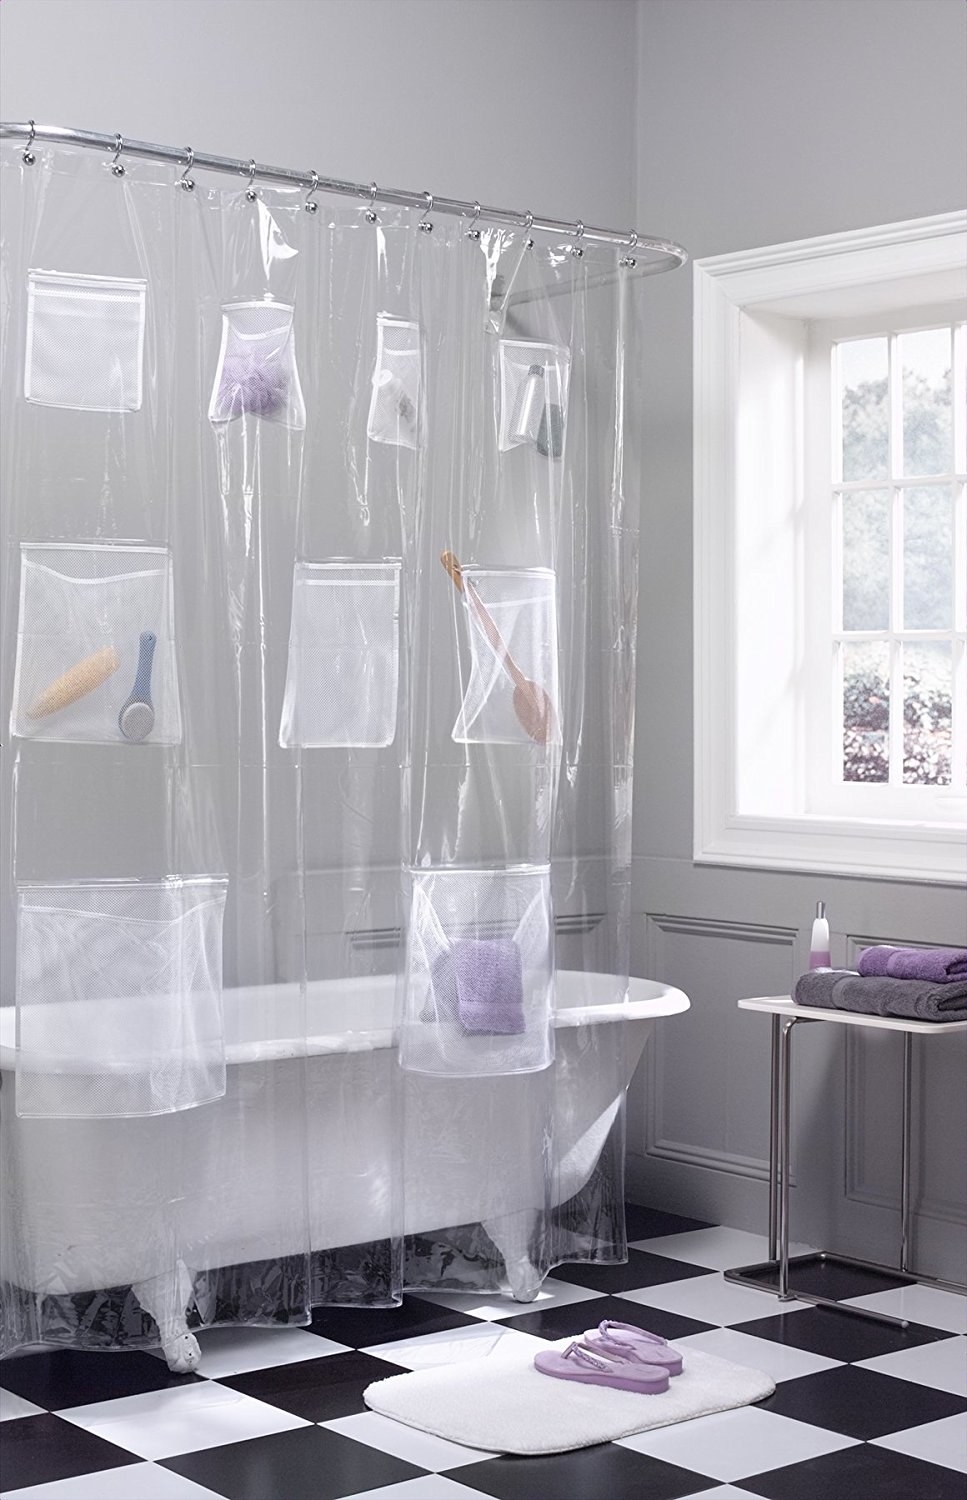 clear shower curtain with pockets holding bathroom accessories